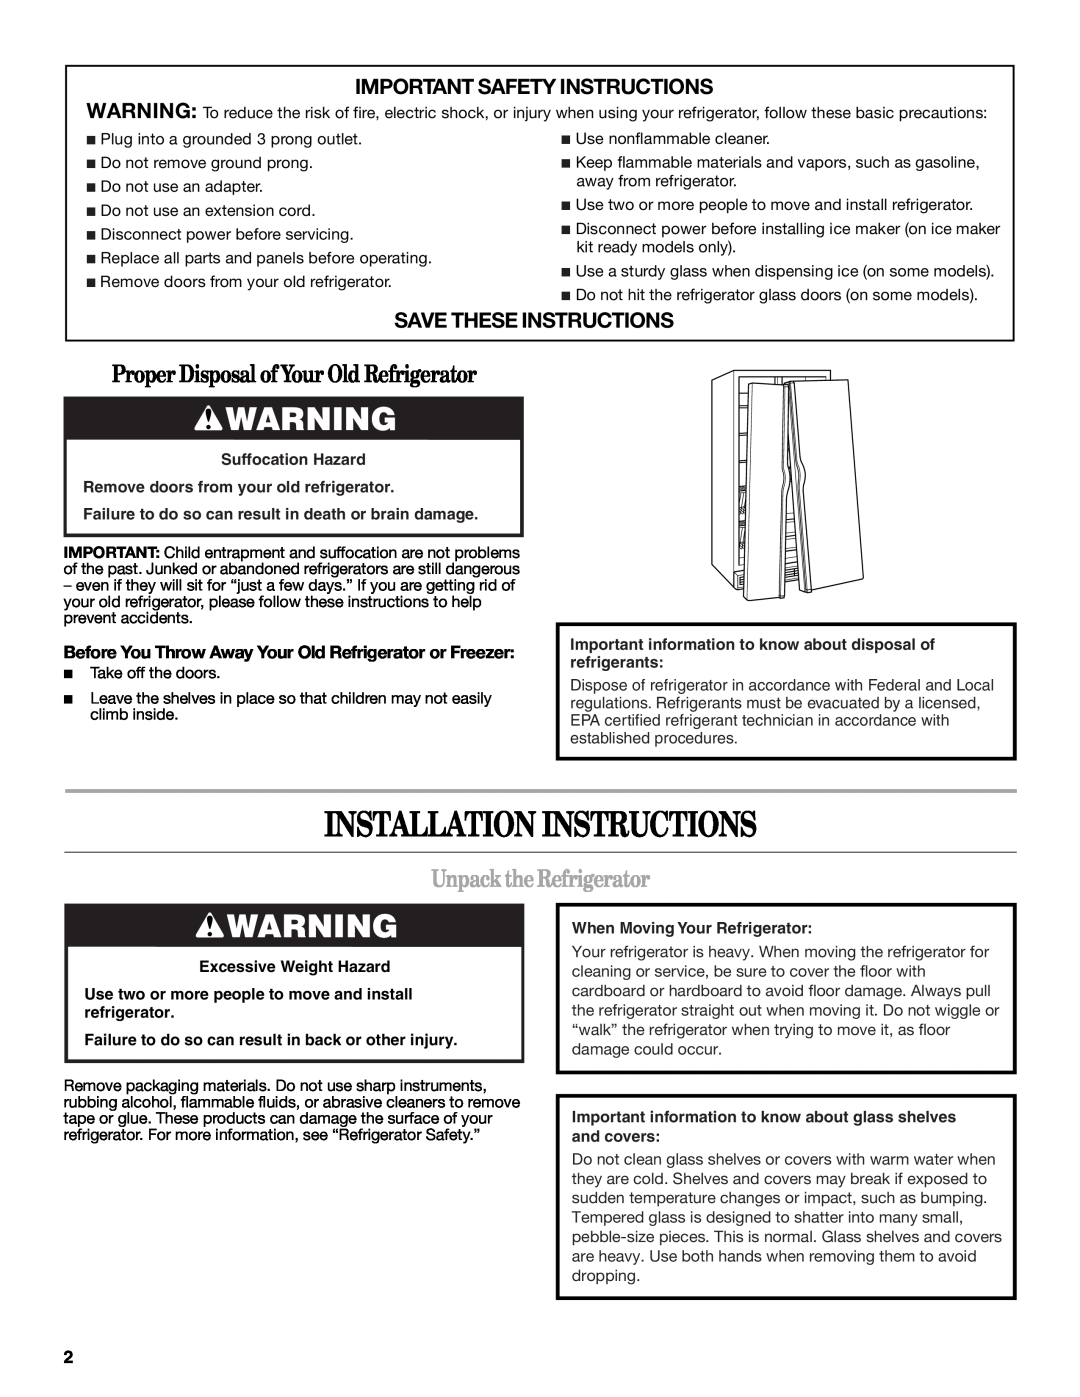 Whirlpool WSF26C2EXB Installation Instructions, Proper Disposal ofYour Old Refrigerator, Unpack the Refrigerator 